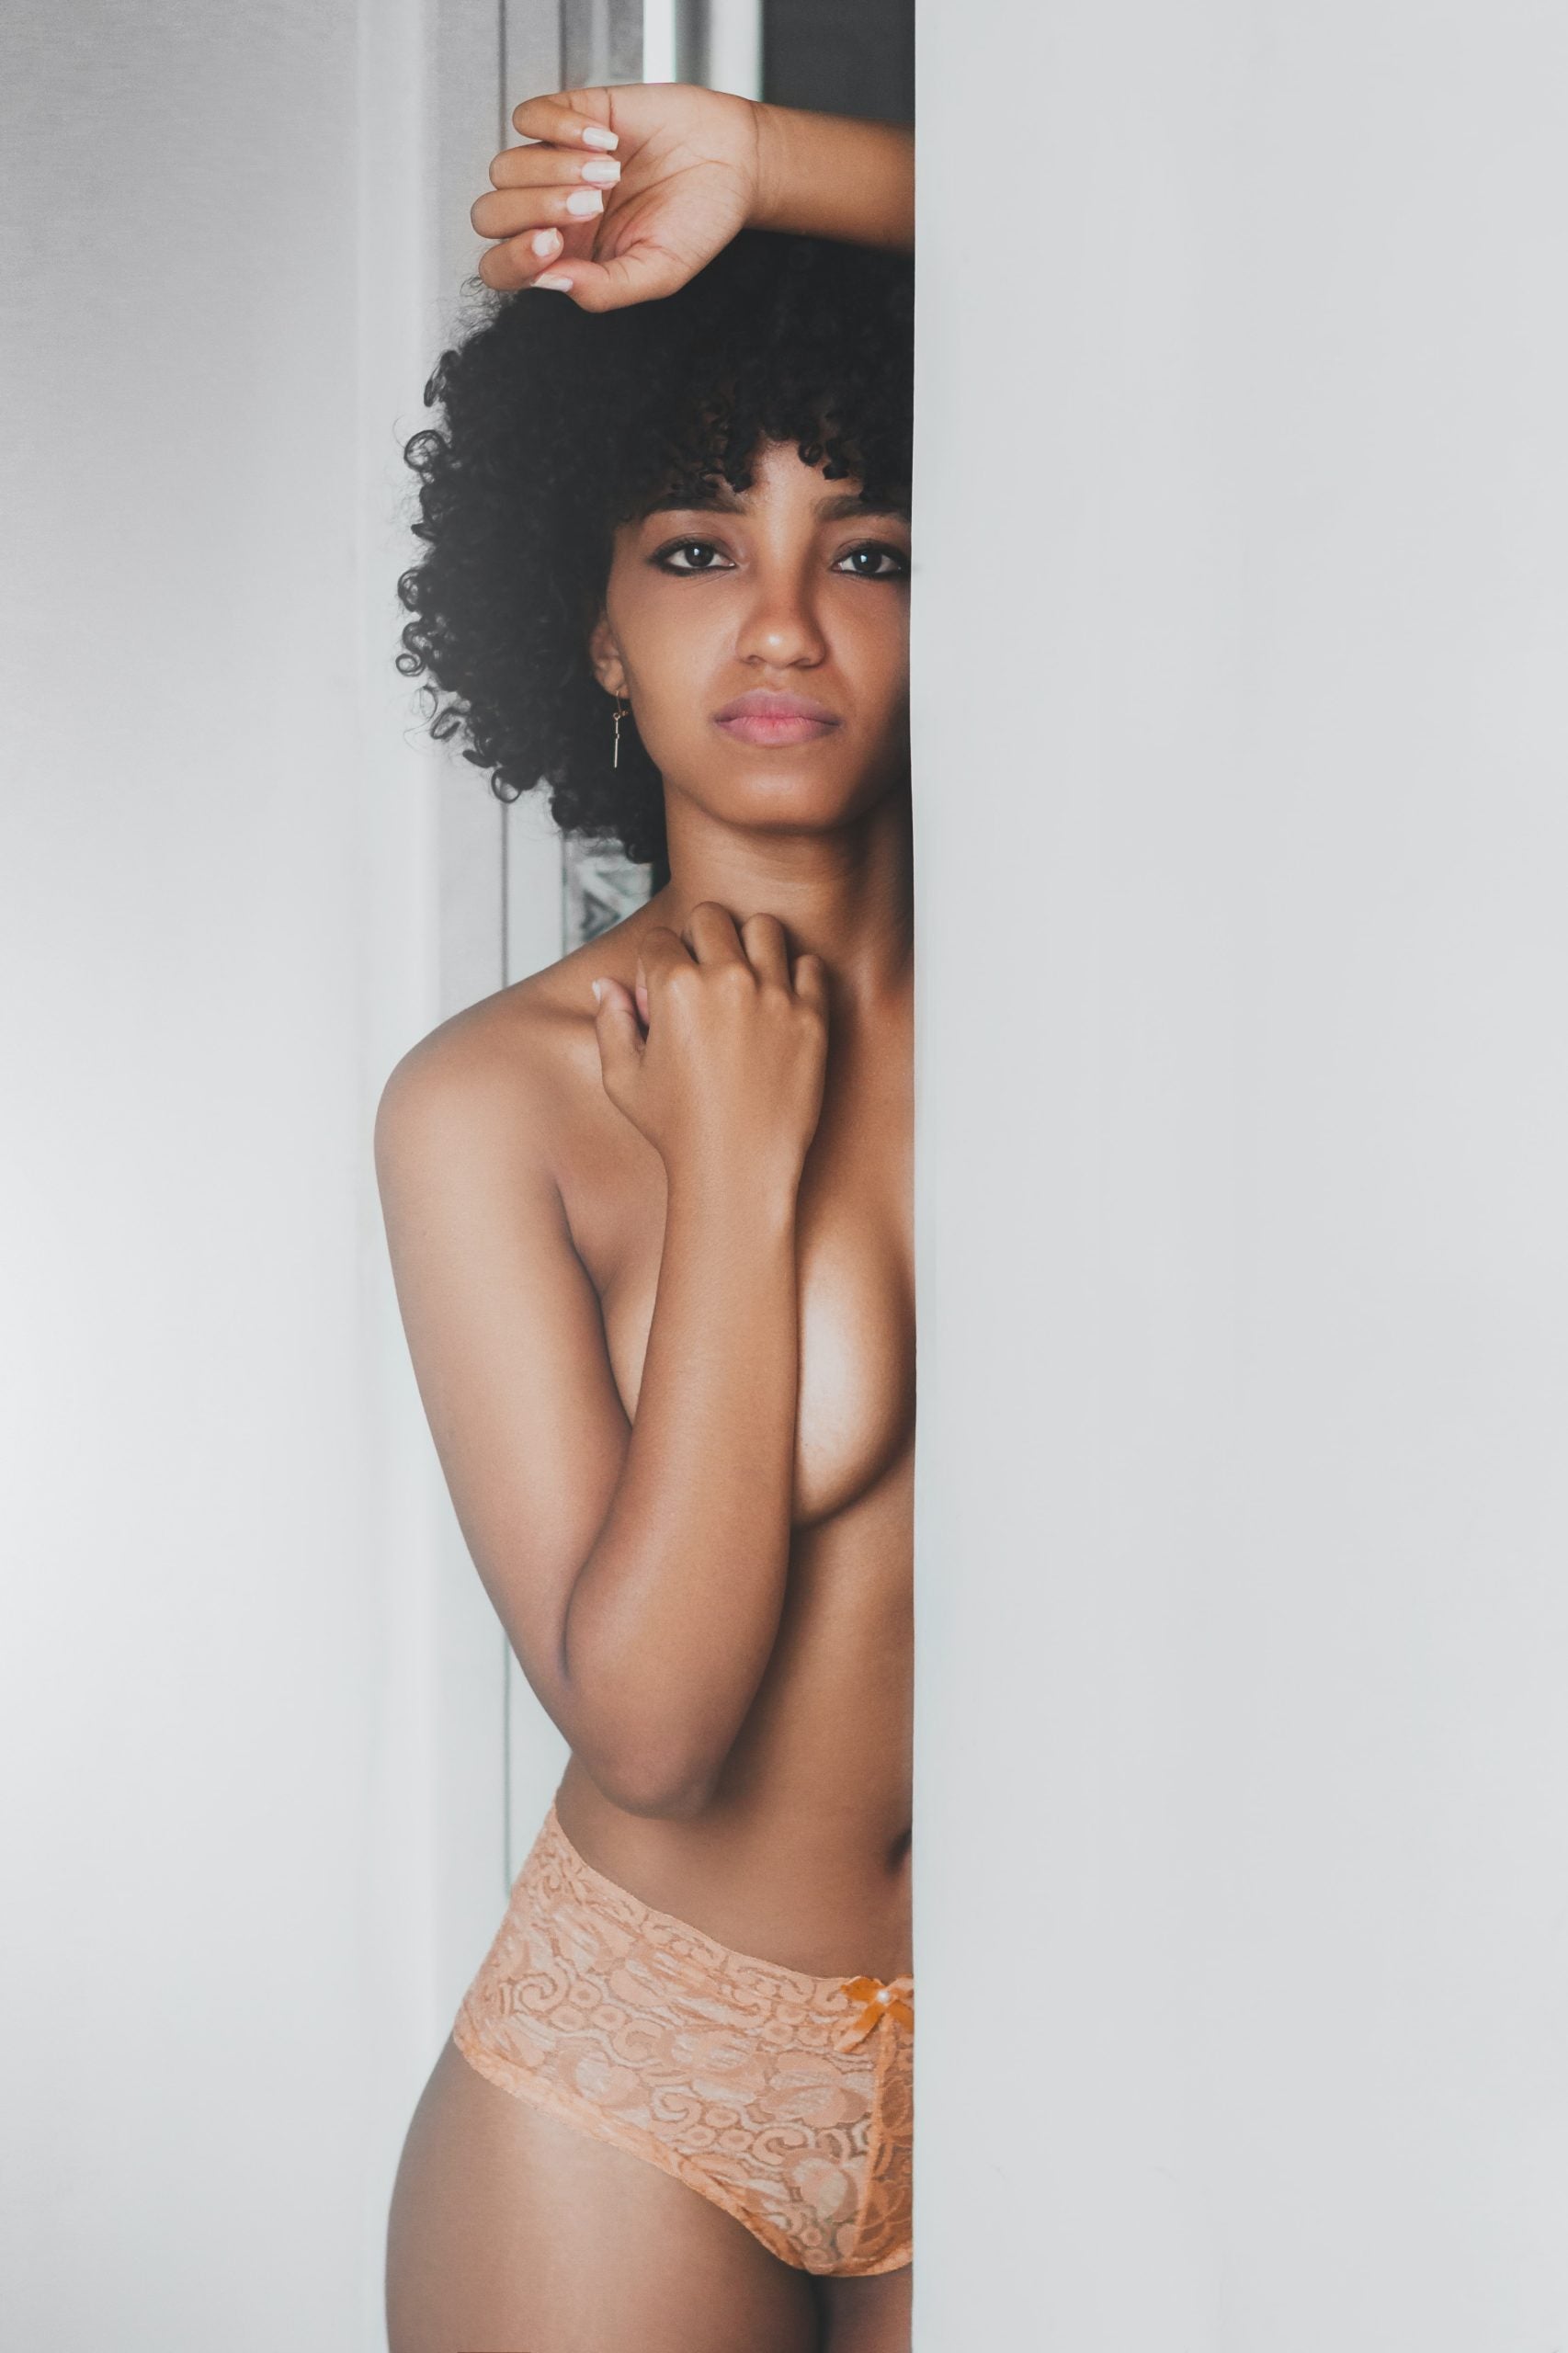 Get Nude 11 Underwear and Shapewear Brands Catering to Women of Color pic pic